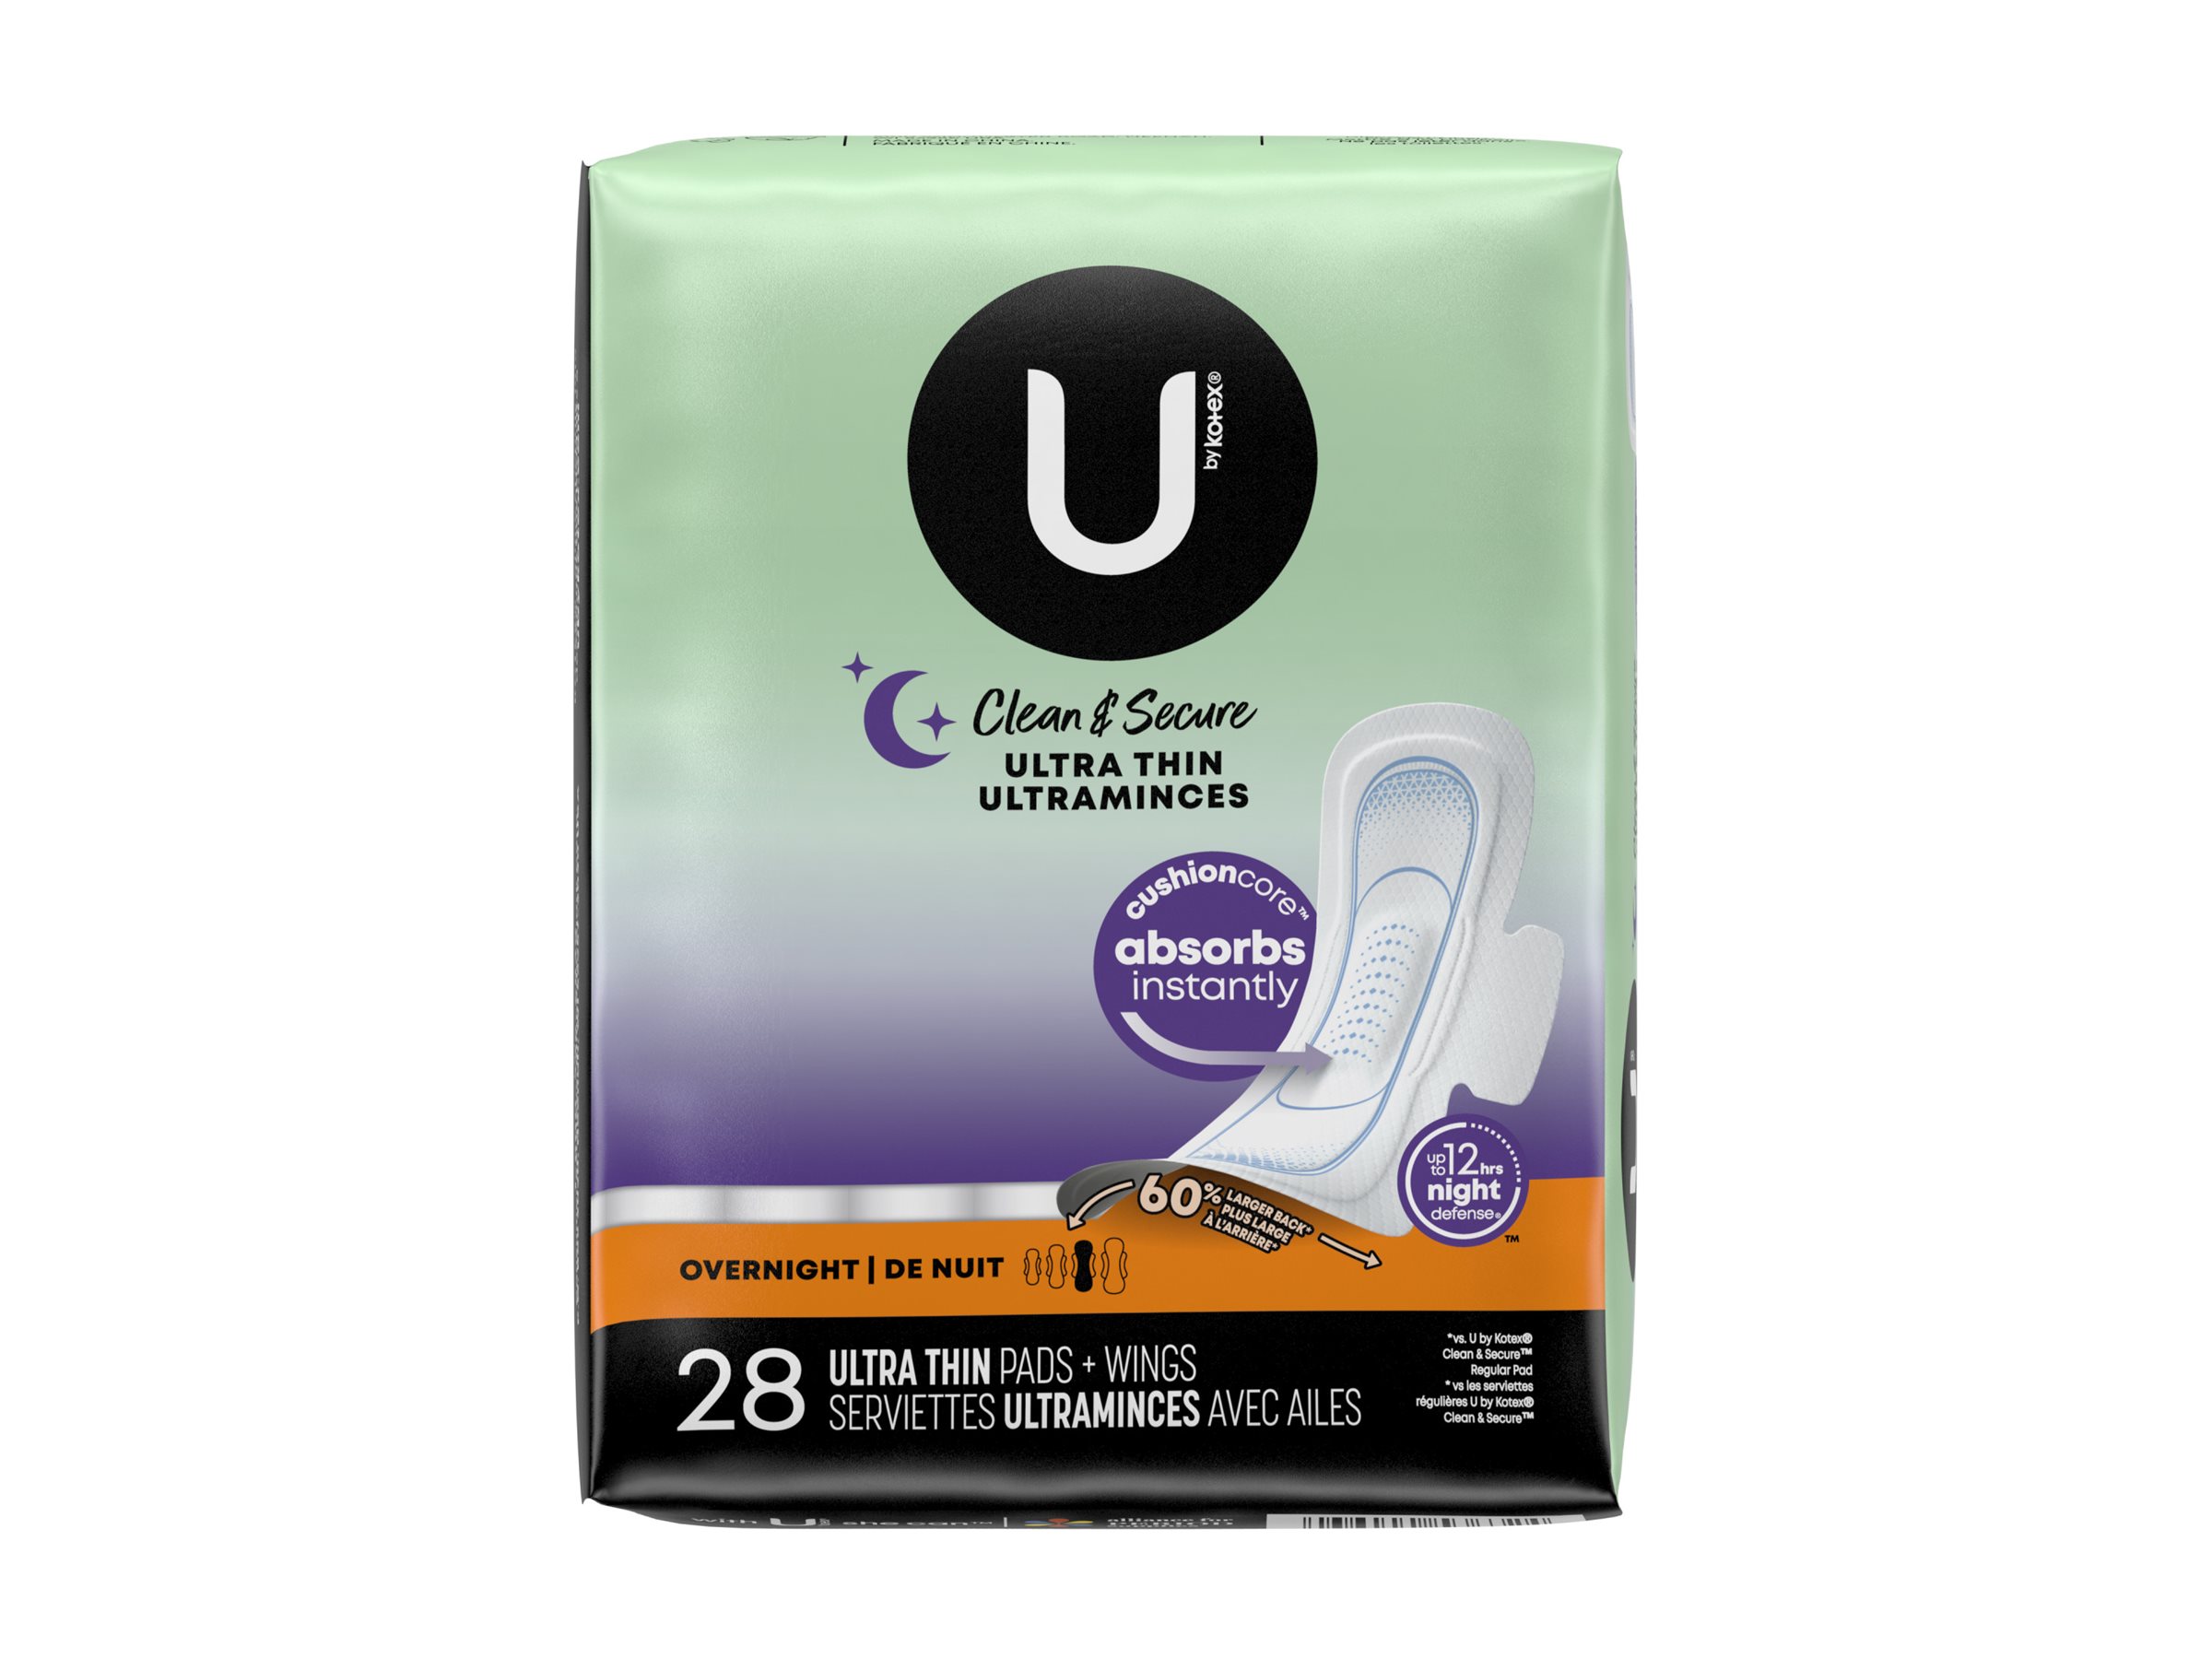 U by Kotex Clean & Secure Ultra Thin Pads with Wings Regular